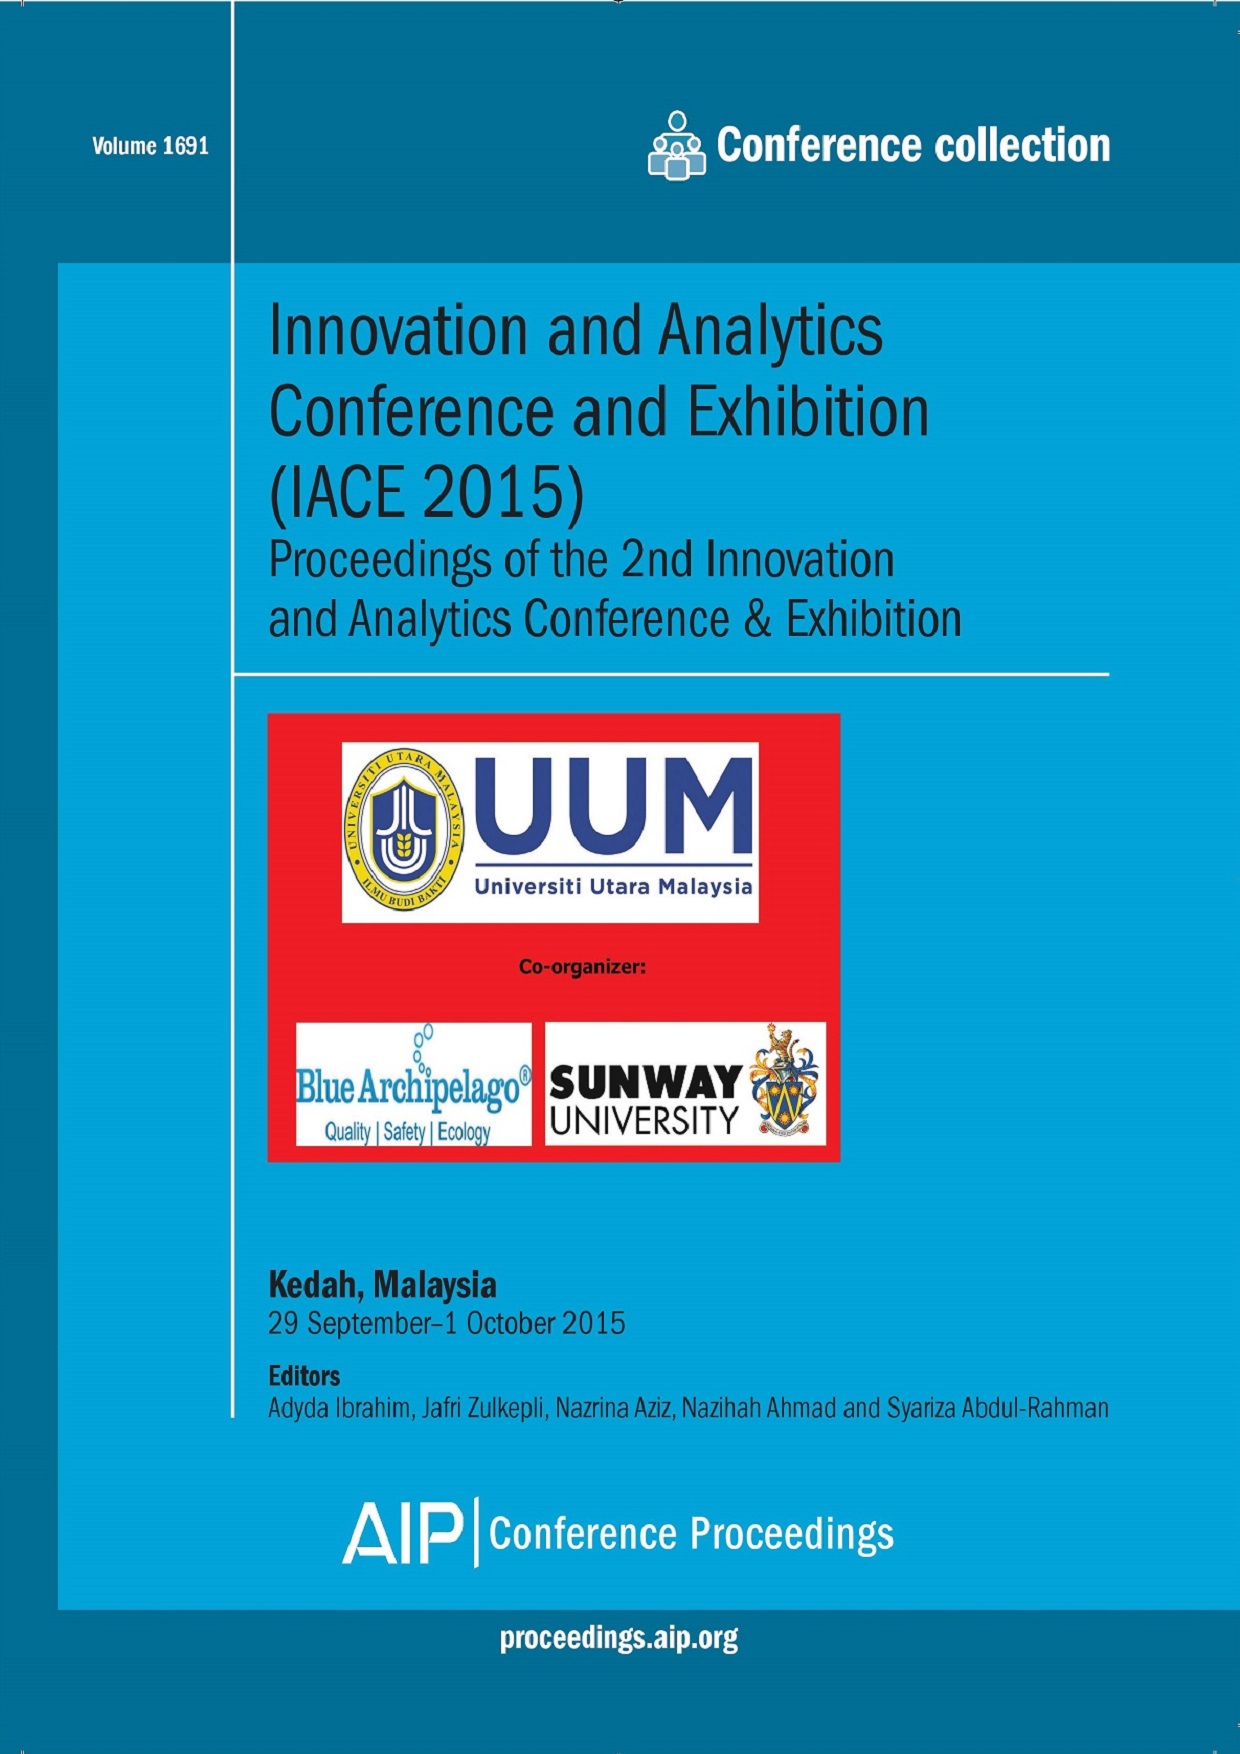 Proceedings of the 2nd Innovation and Analytics Conference & Exhibition